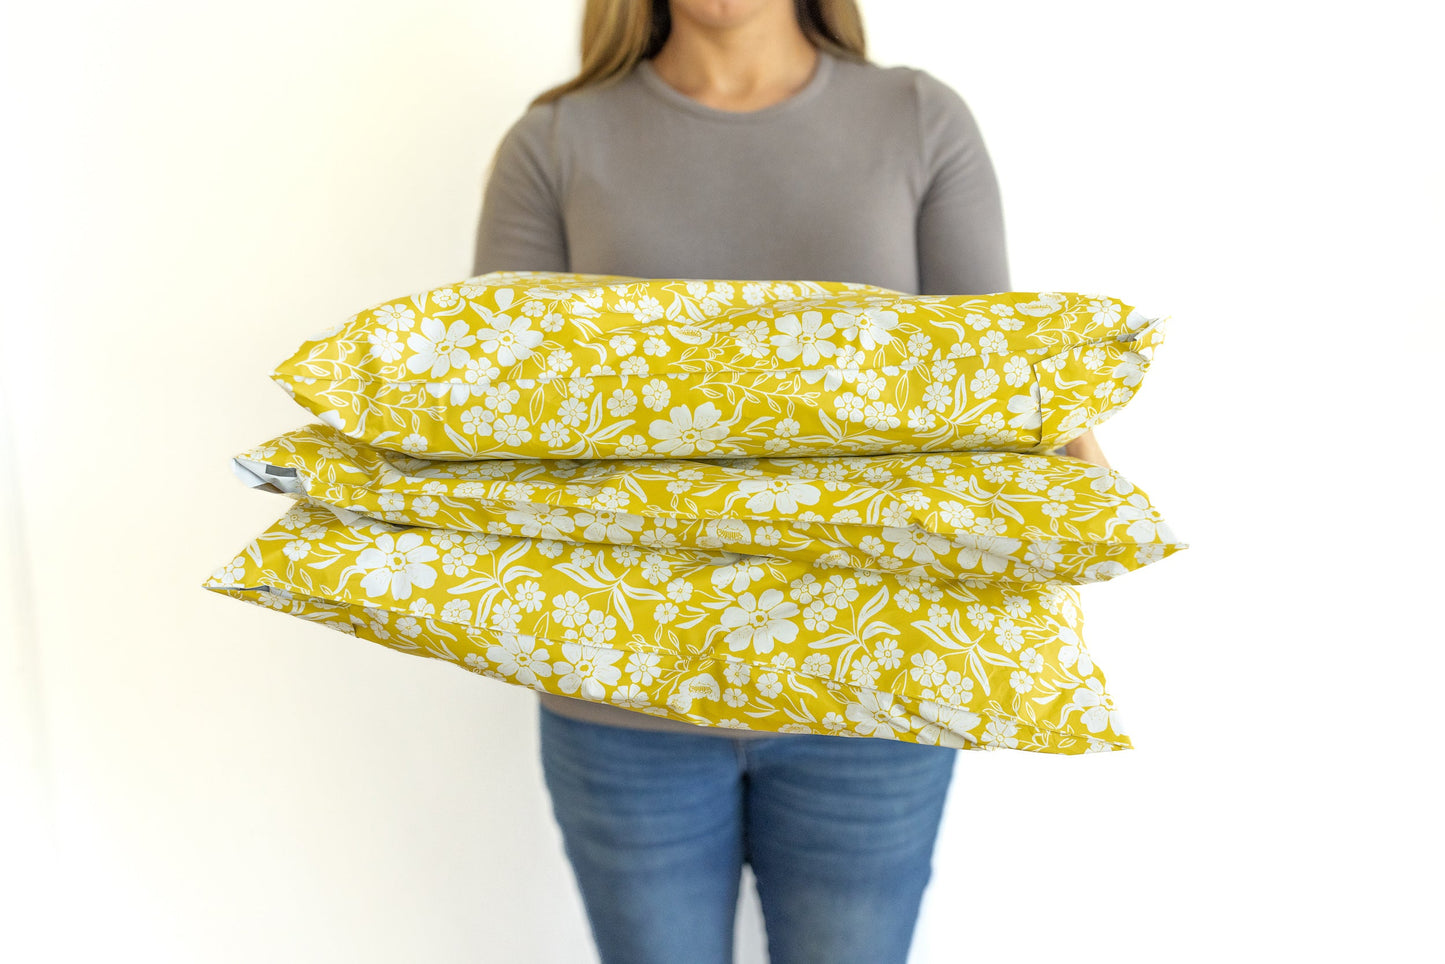 Extra large 14.5x19 inch polymailer bags in a fun bright pattern.